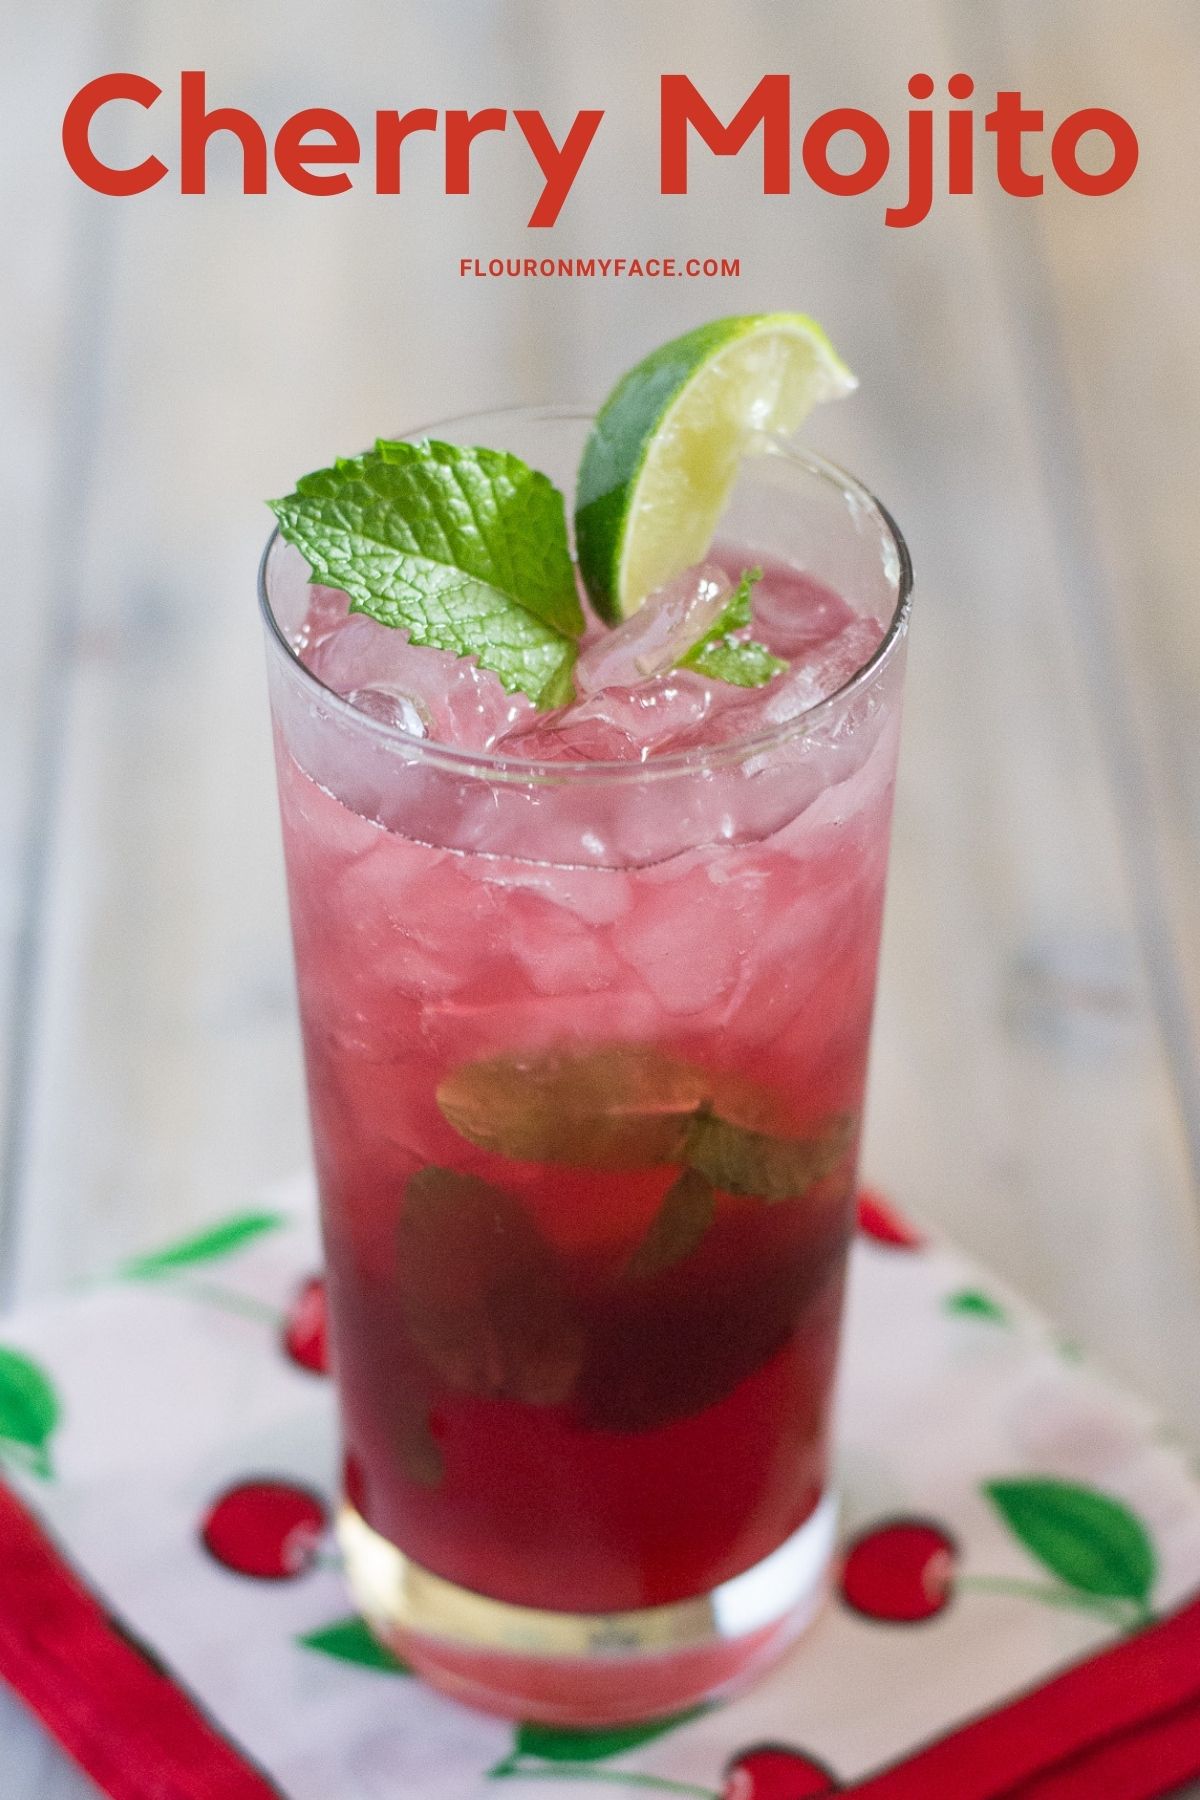 A tall glass on a cloth napkin filled with a sweet cherry mojito.